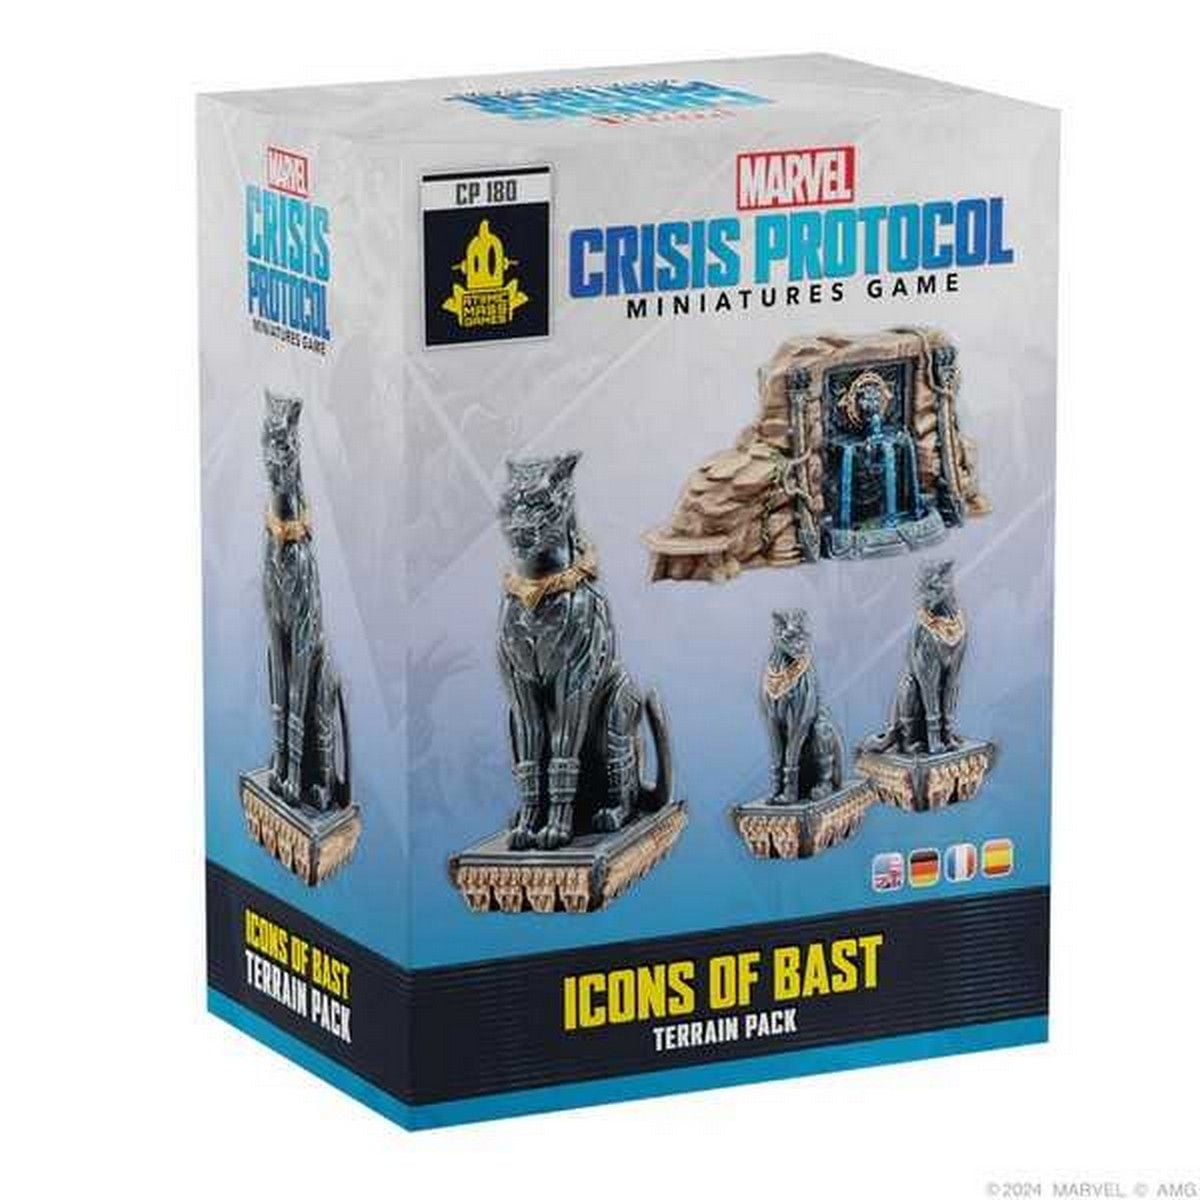 Marvel Crisis Protocol: Icons Of Bast - Terrain Pack